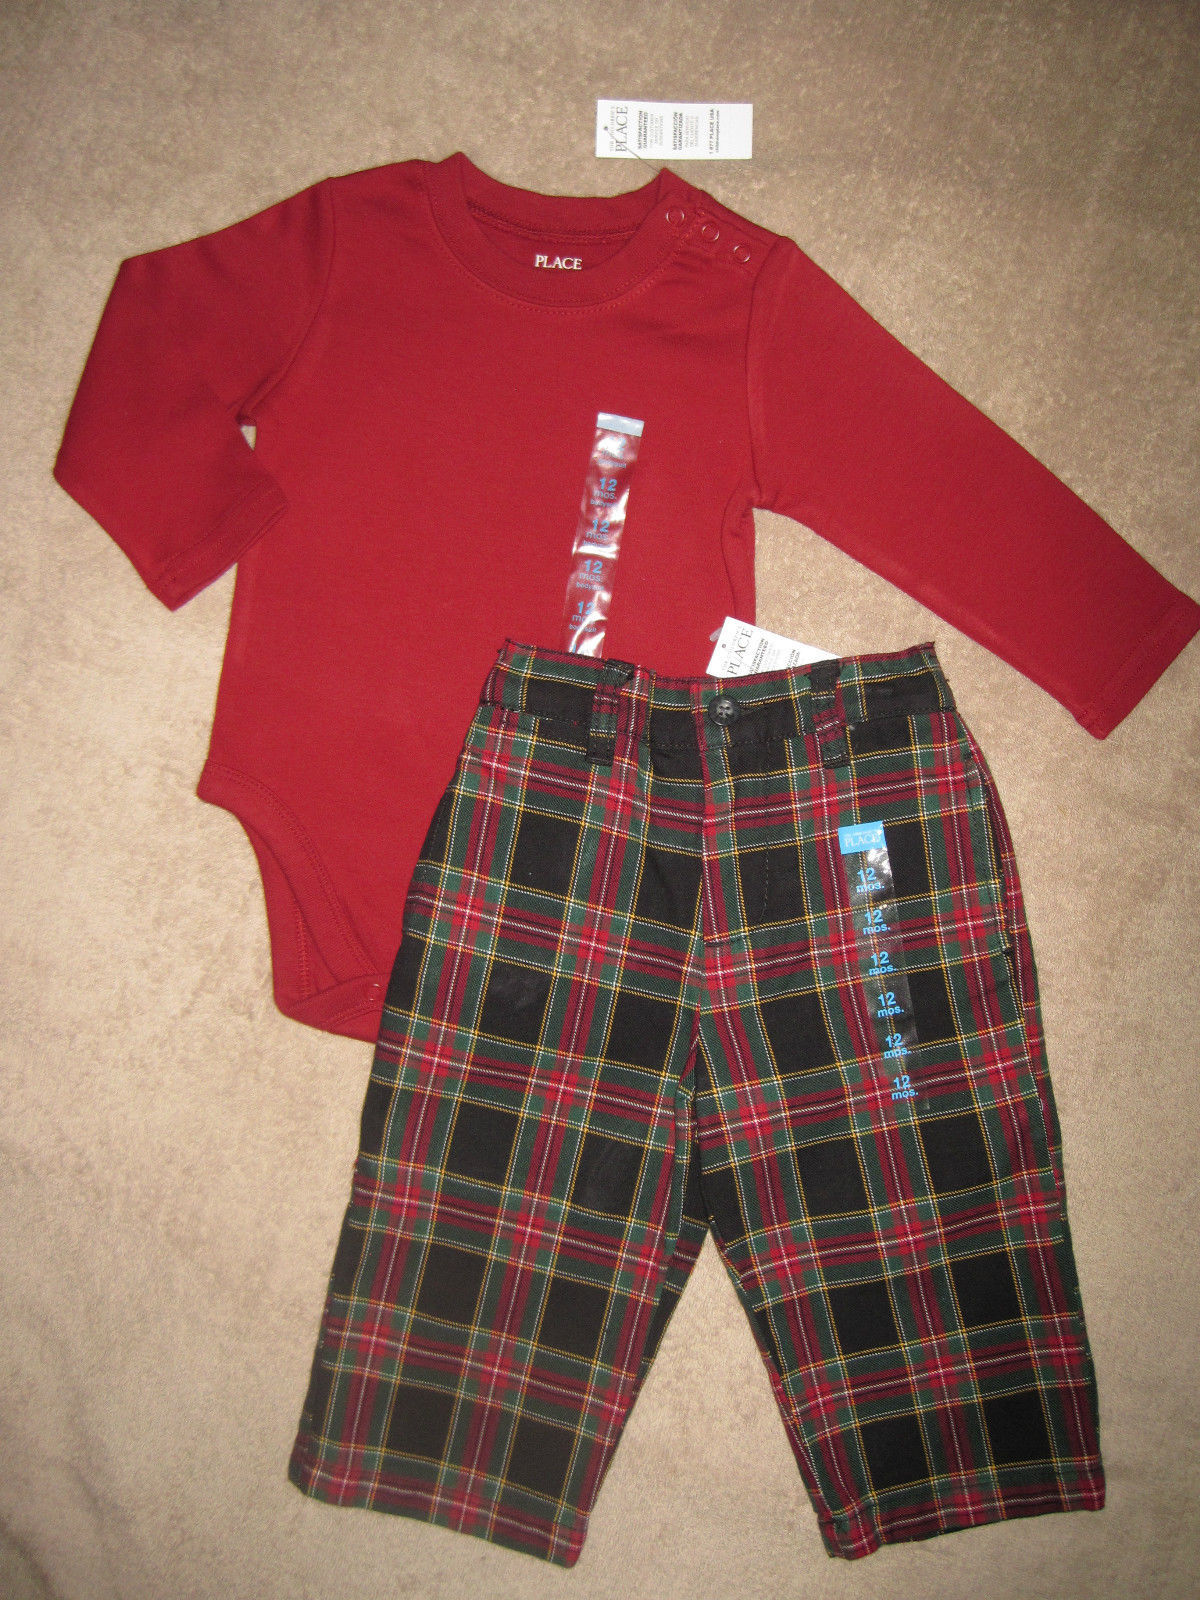 BOYS 12 MONTHS - Children's Place -  Red Bodyshirt & Red/Navy Plaid Pants - $16.00